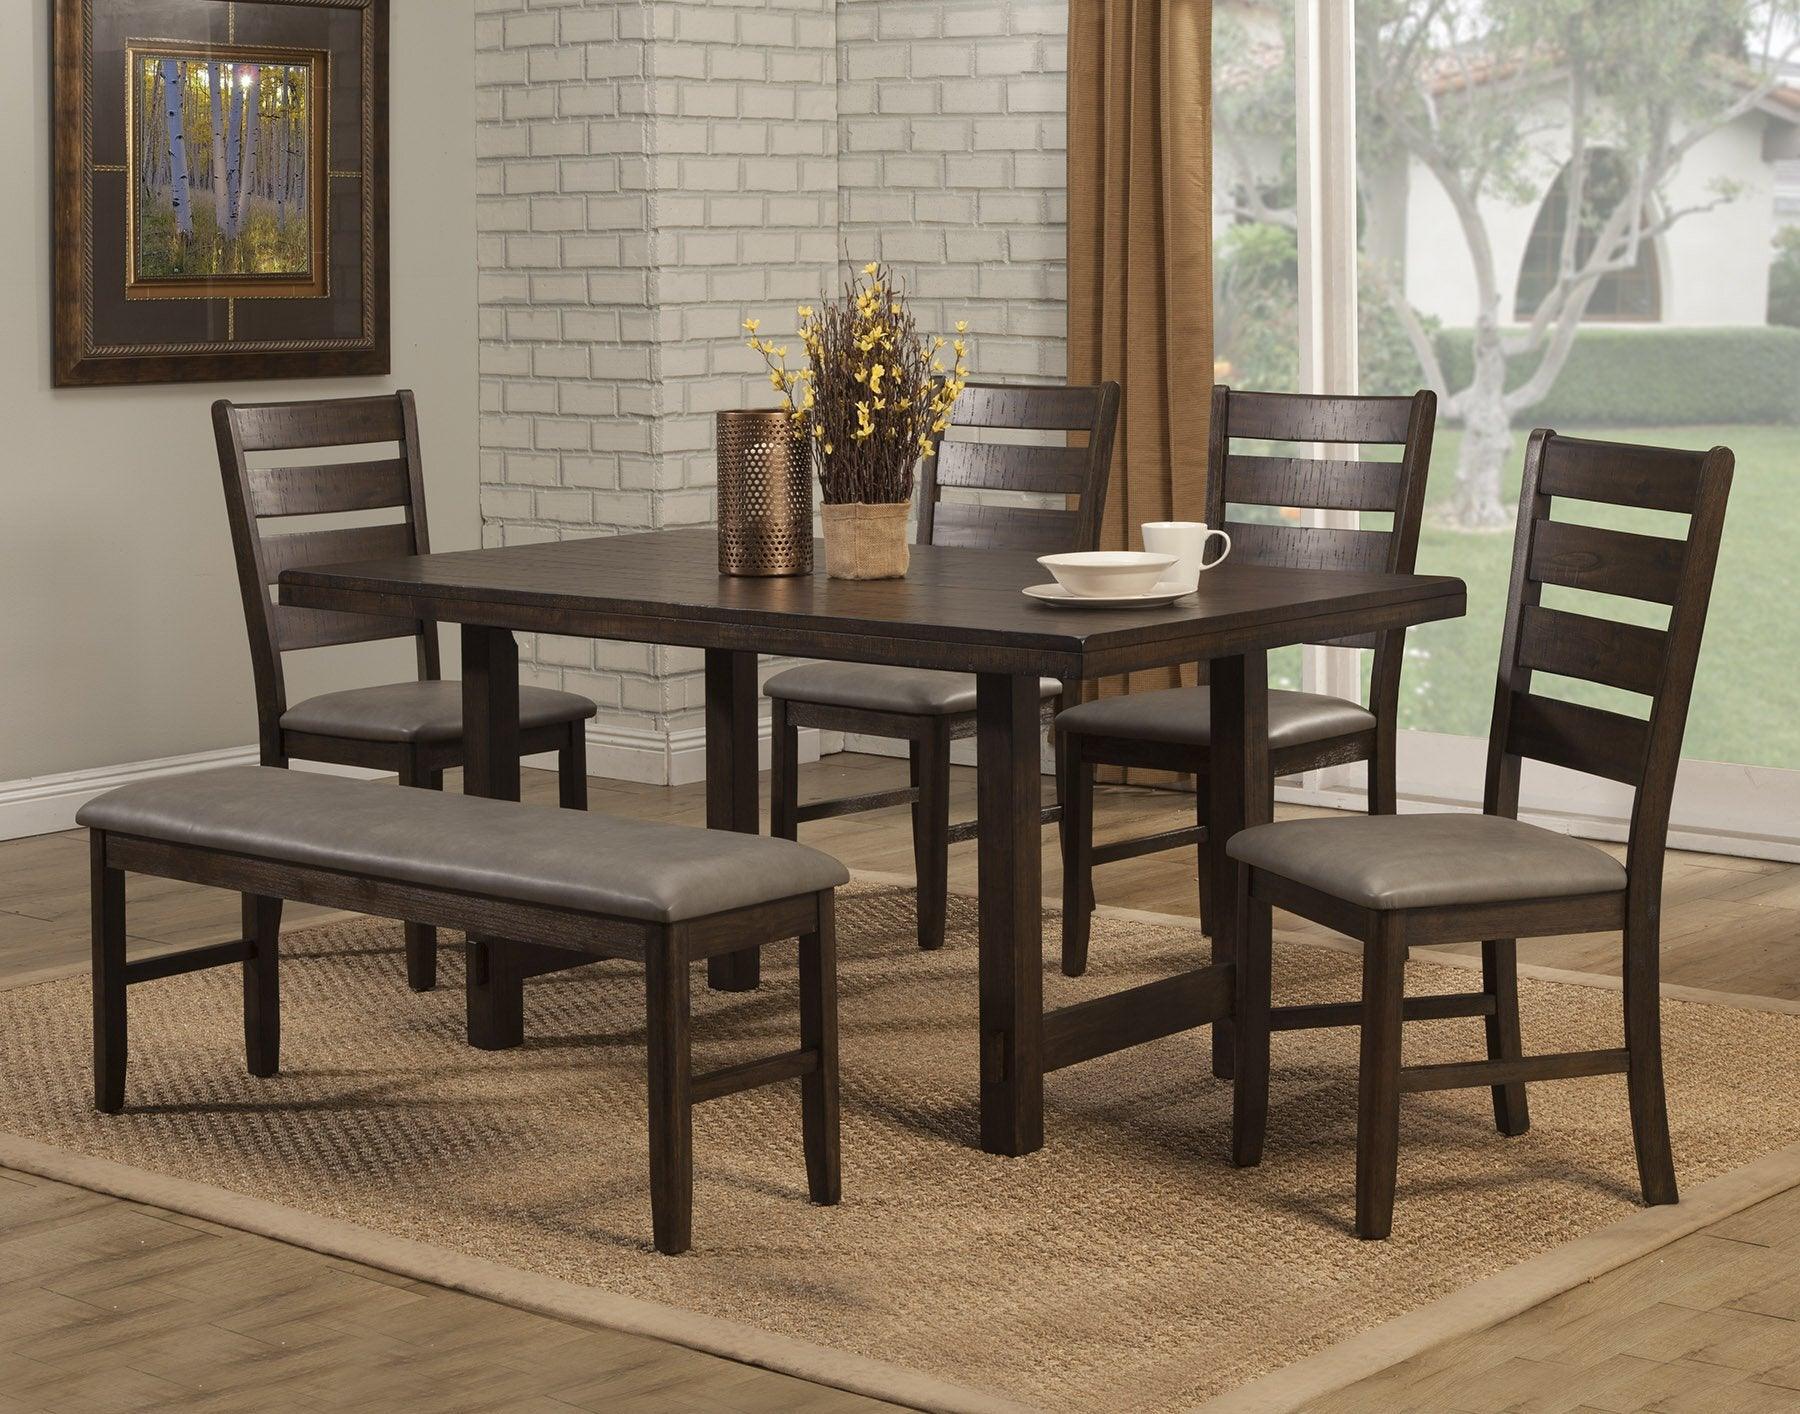 Alpine Furniture Dining Tables - Emery Dining Table Walnut